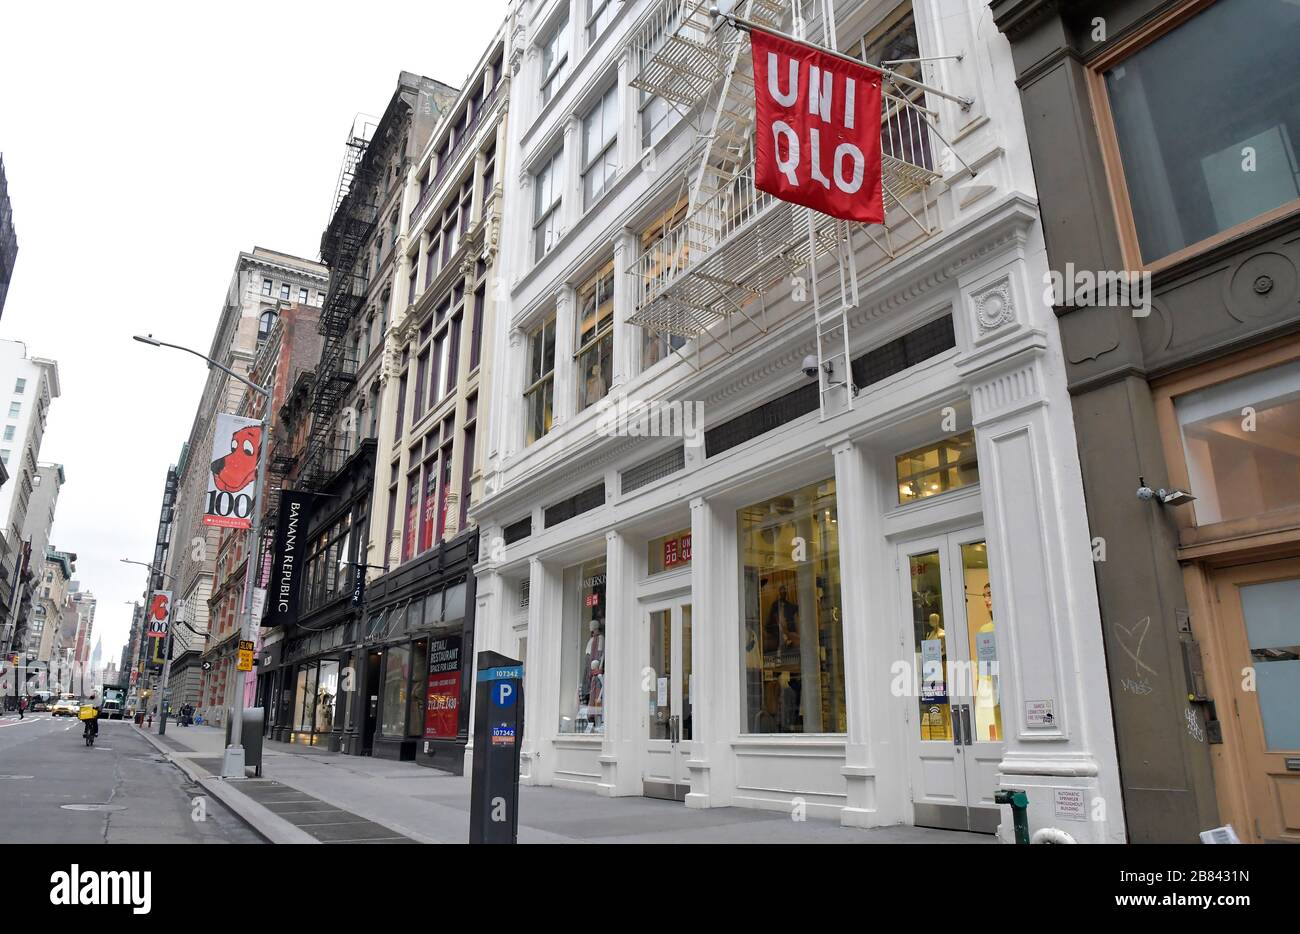 Uniqlo Brand High Resolution Stock Photography and Images - Alamy